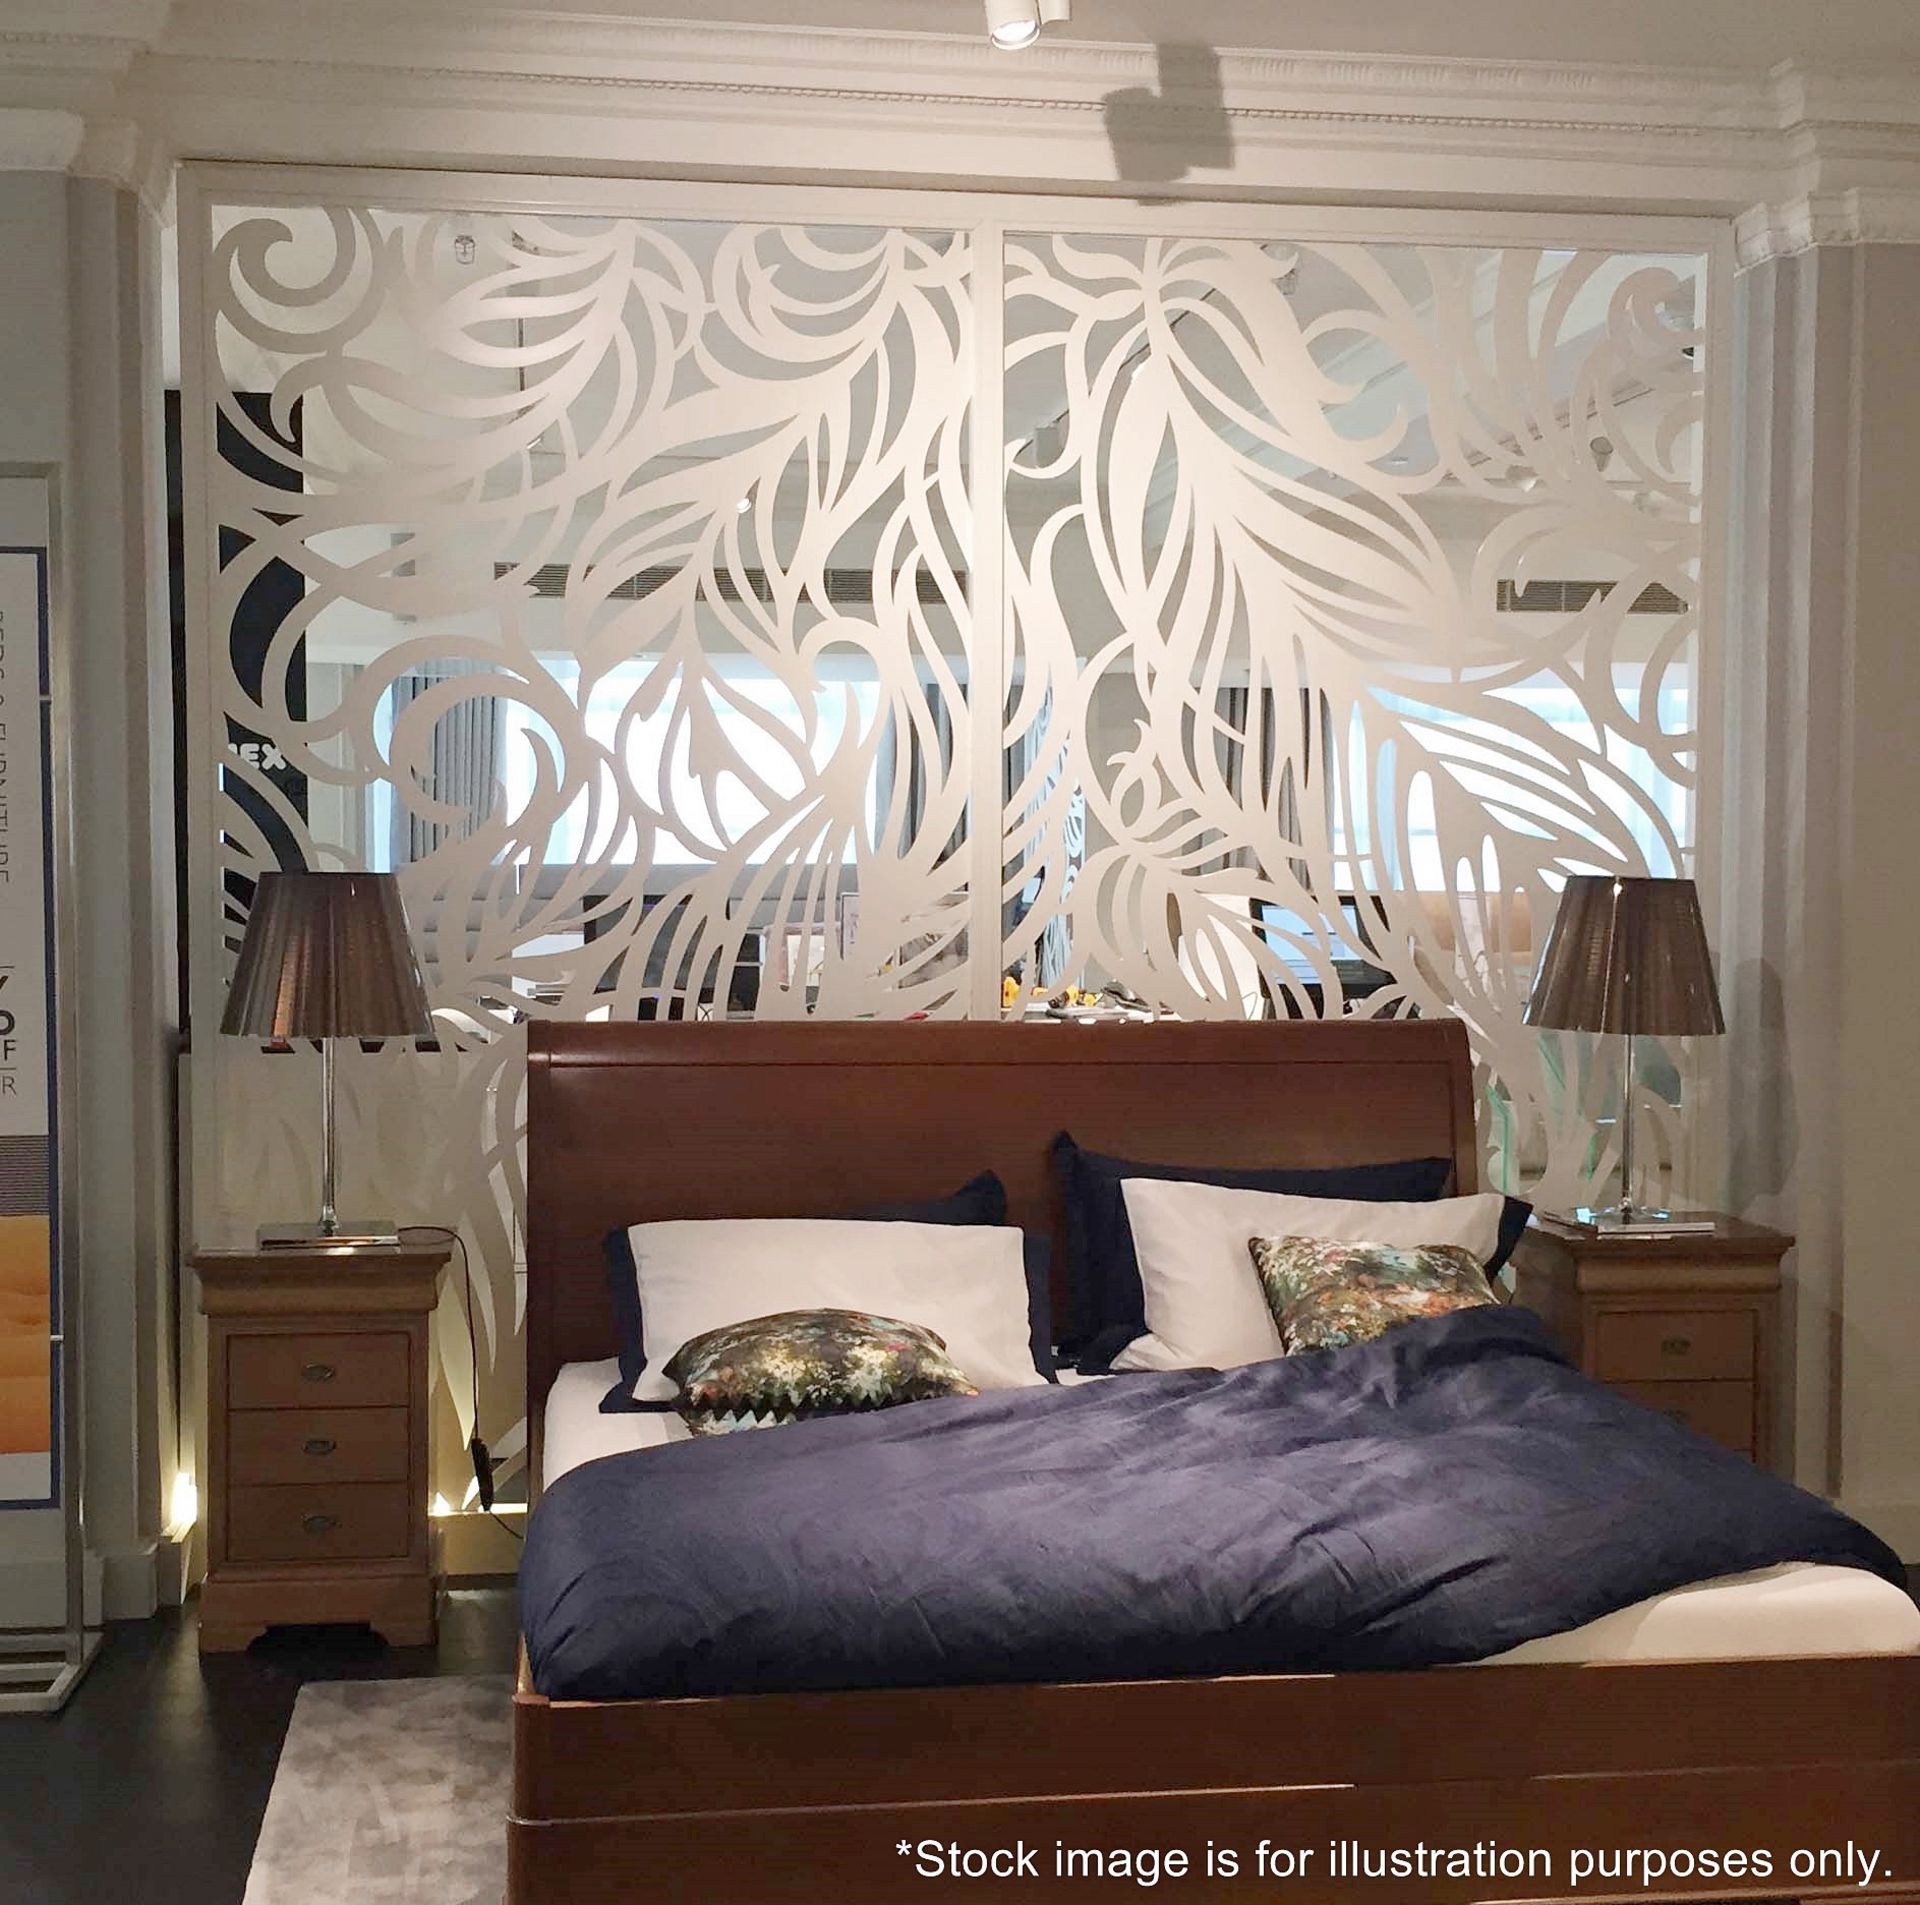 A Set Of 2 x Elegant 'Miles and Lincoln' Laser Cut Metal Room Divider Panels In A Feather Design - - Image 2 of 5